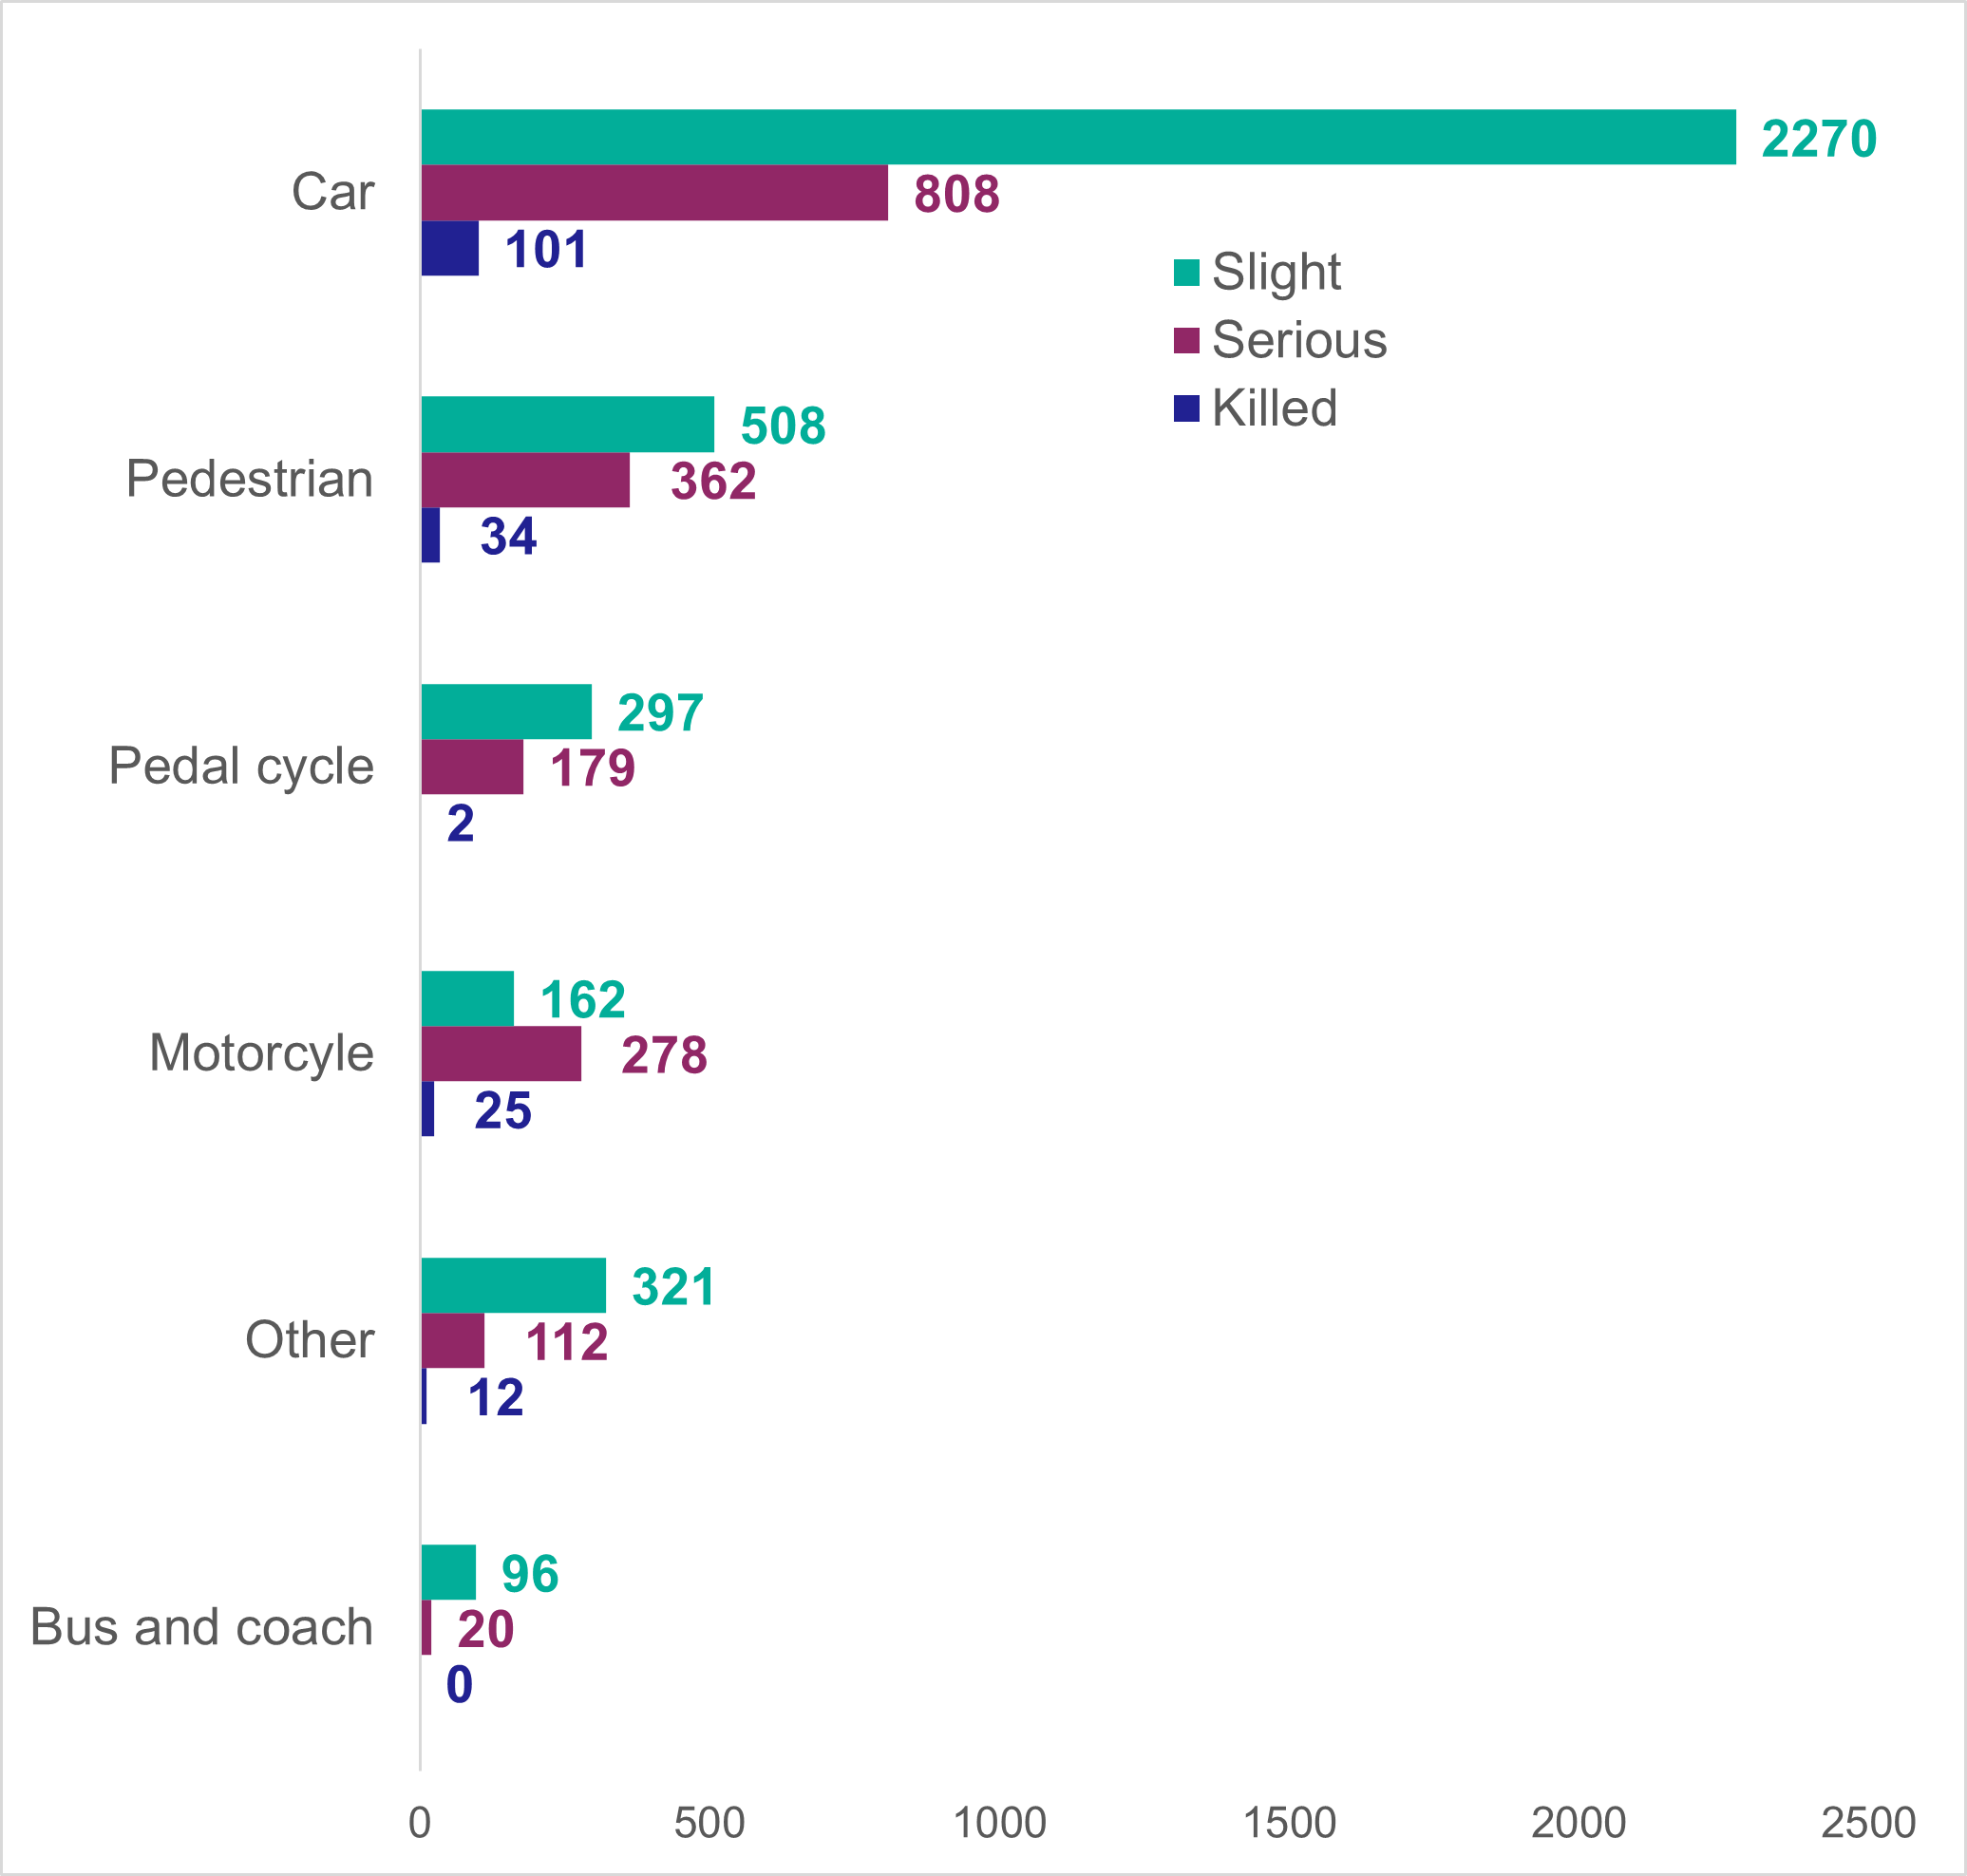 Figure 6: Number of casualties by mode of transport, 2022 - as described in text above